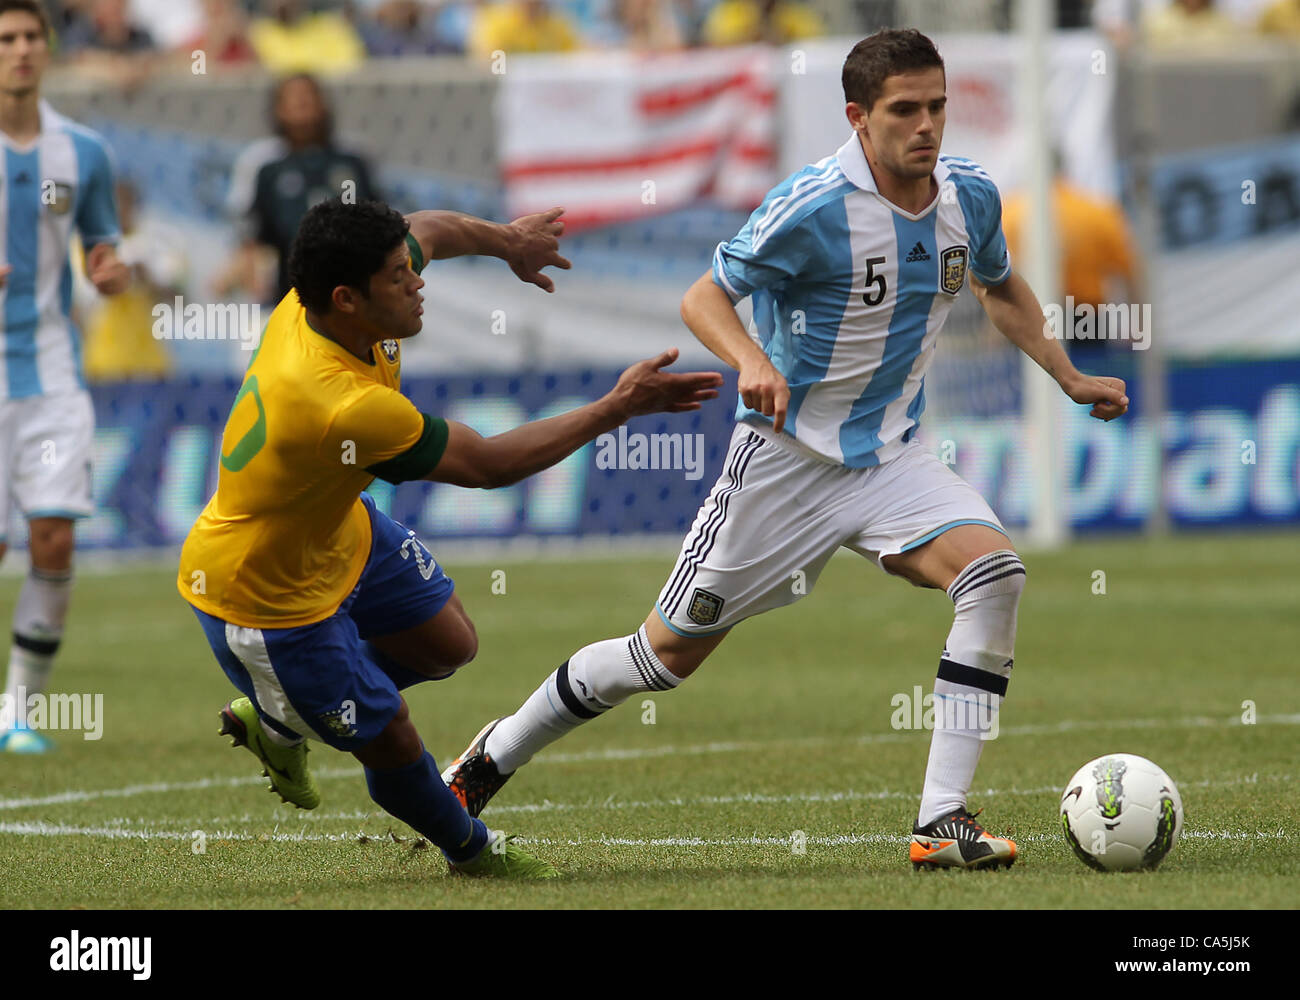 09.06.2012. New Jersey, USA. Fernando Gago (5) of Argentina gets away from Hulk (20) of Brazil during an international friendly match at Metlife Stadium in East Rutherford,New Jersey. Argentina won 4-3. Stock Photo